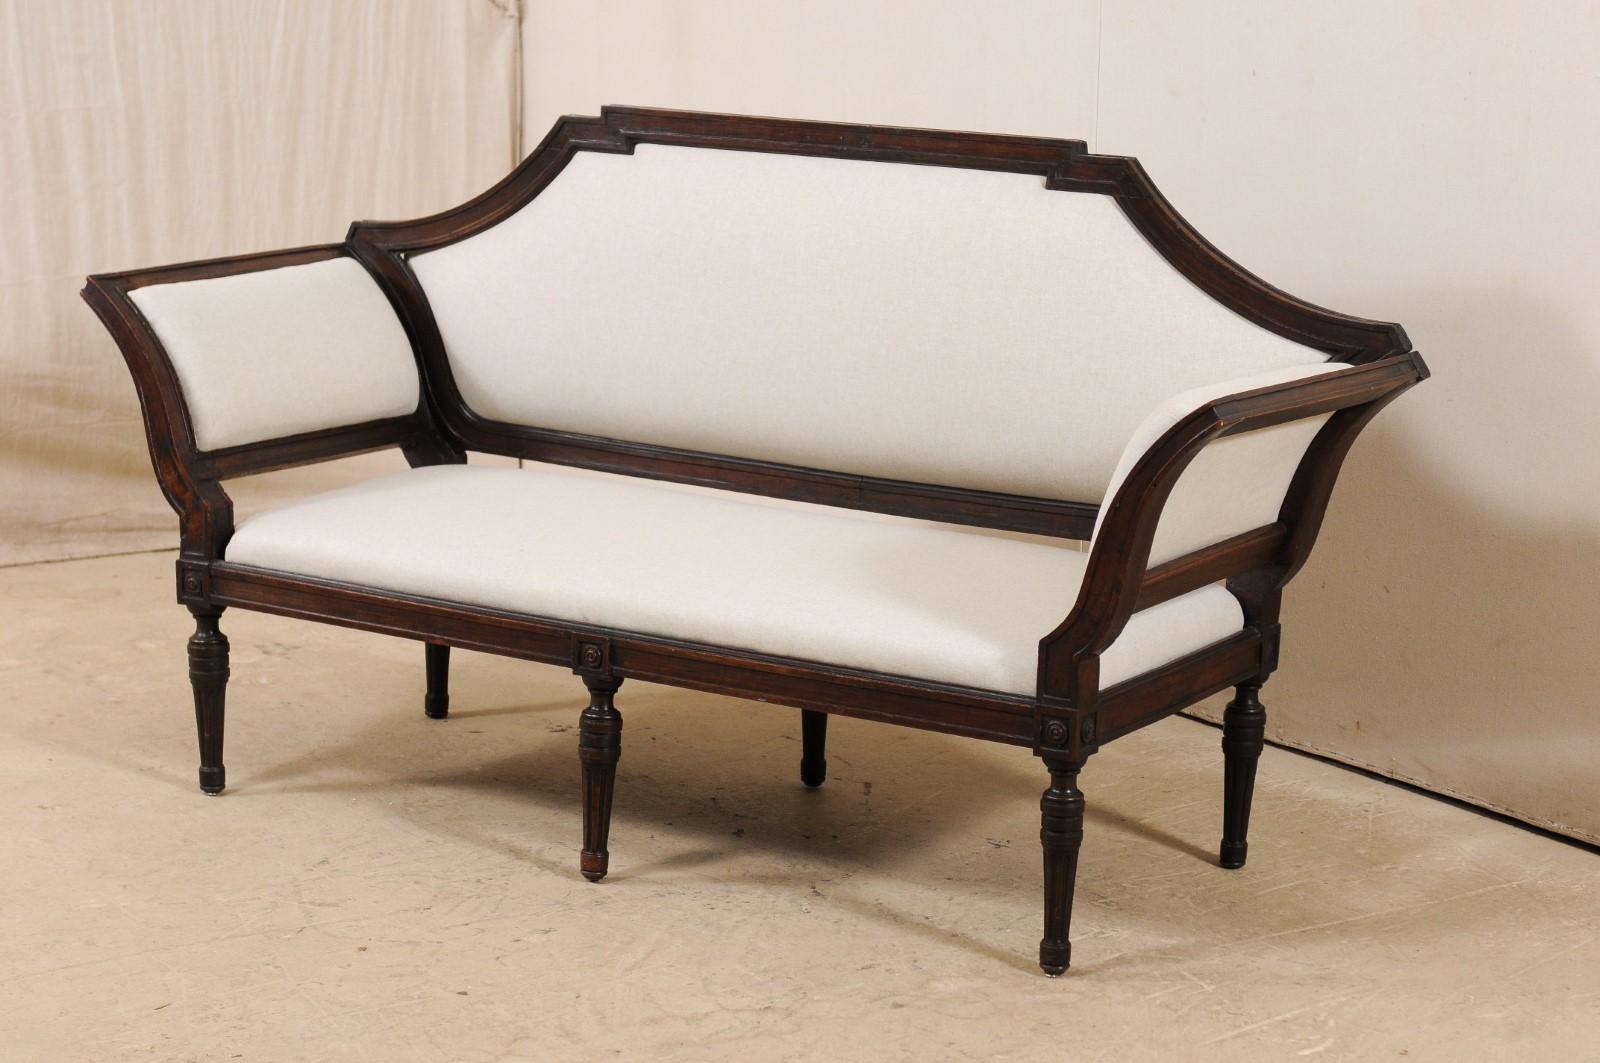 18th Century Italian Venetian Sofa with Removable Back, Converts to a Bench In Good Condition For Sale In Atlanta, GA